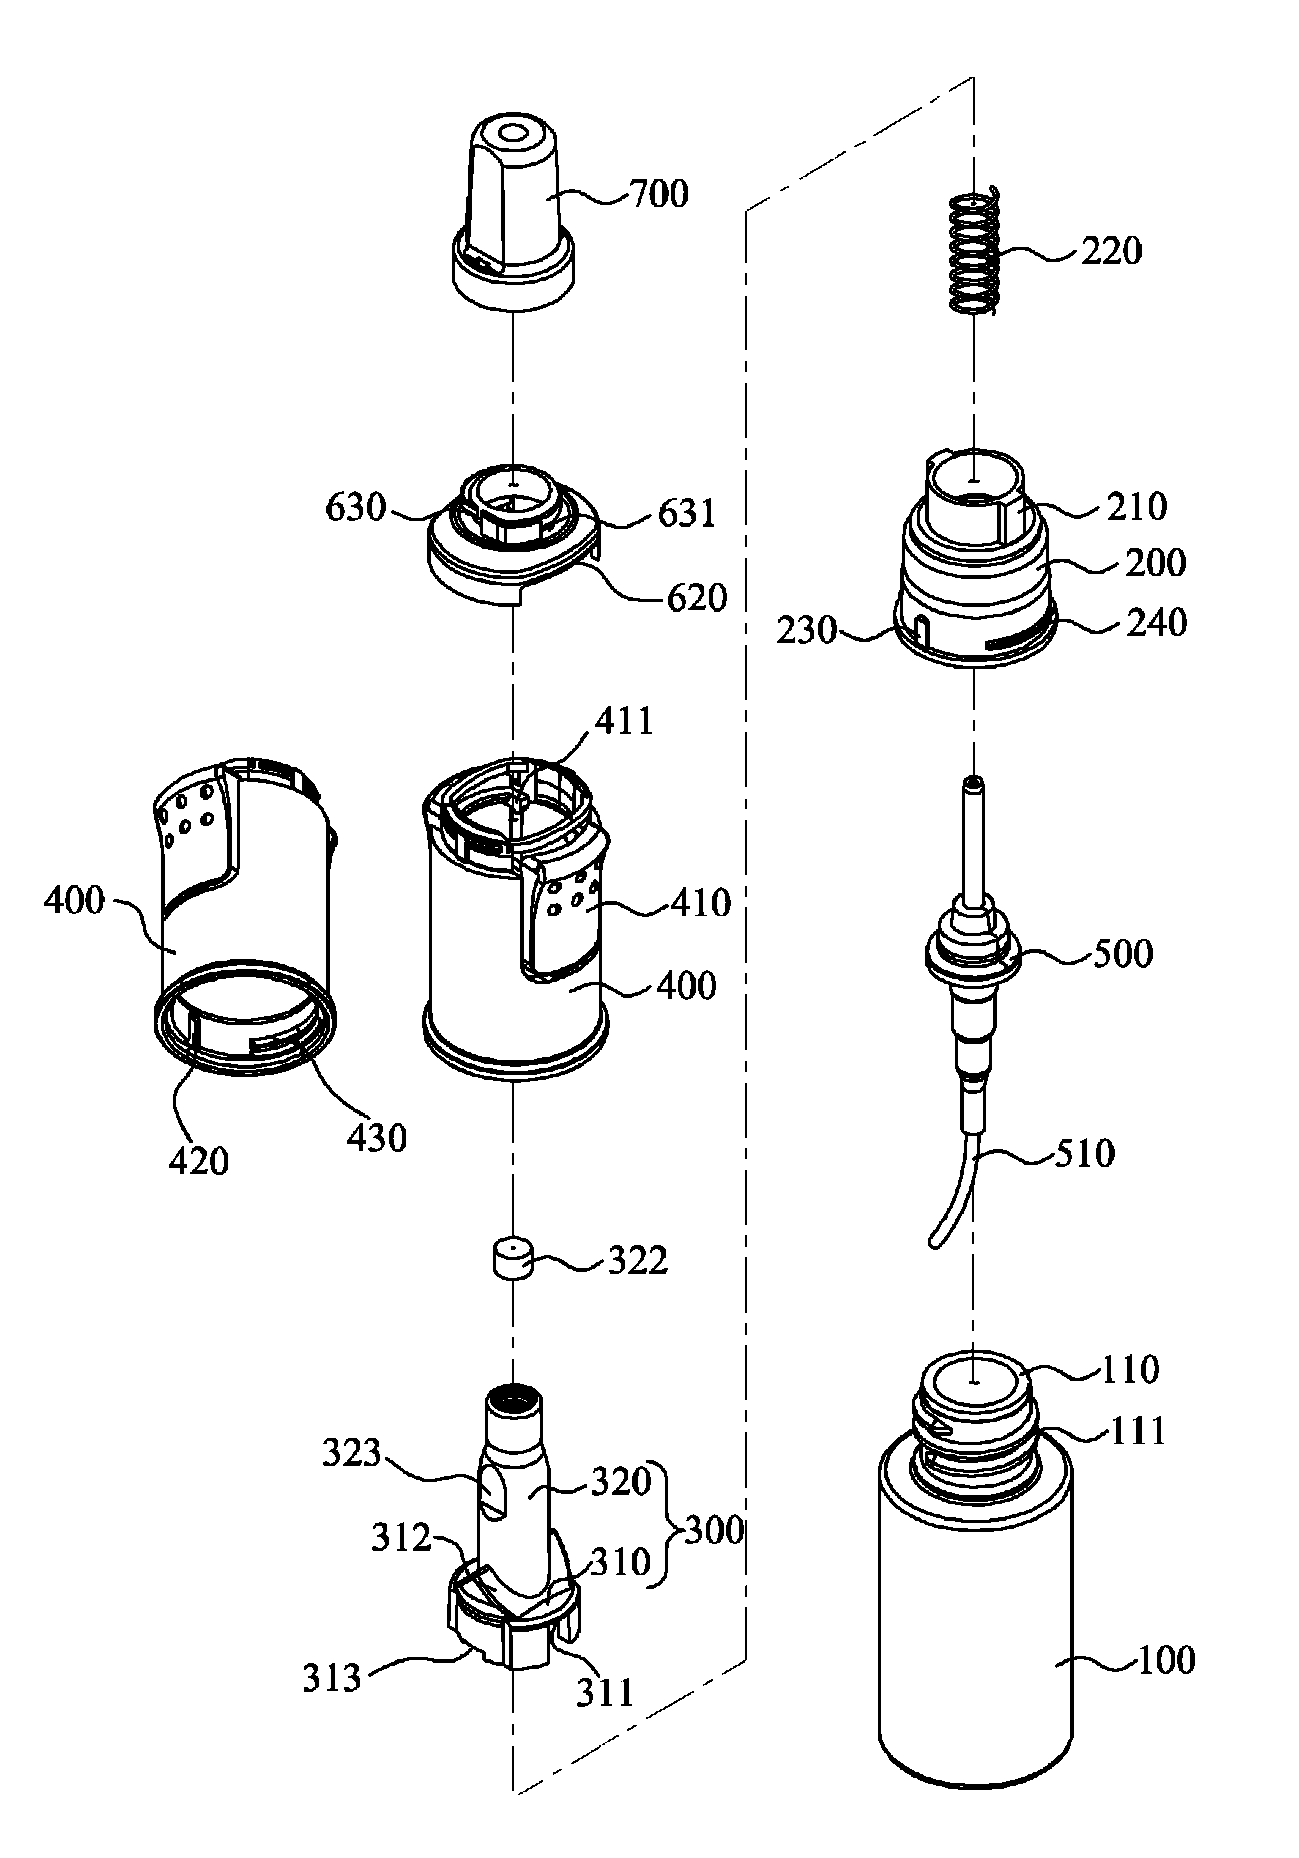 Washing water spraying vessel for nasal cavity cleaner